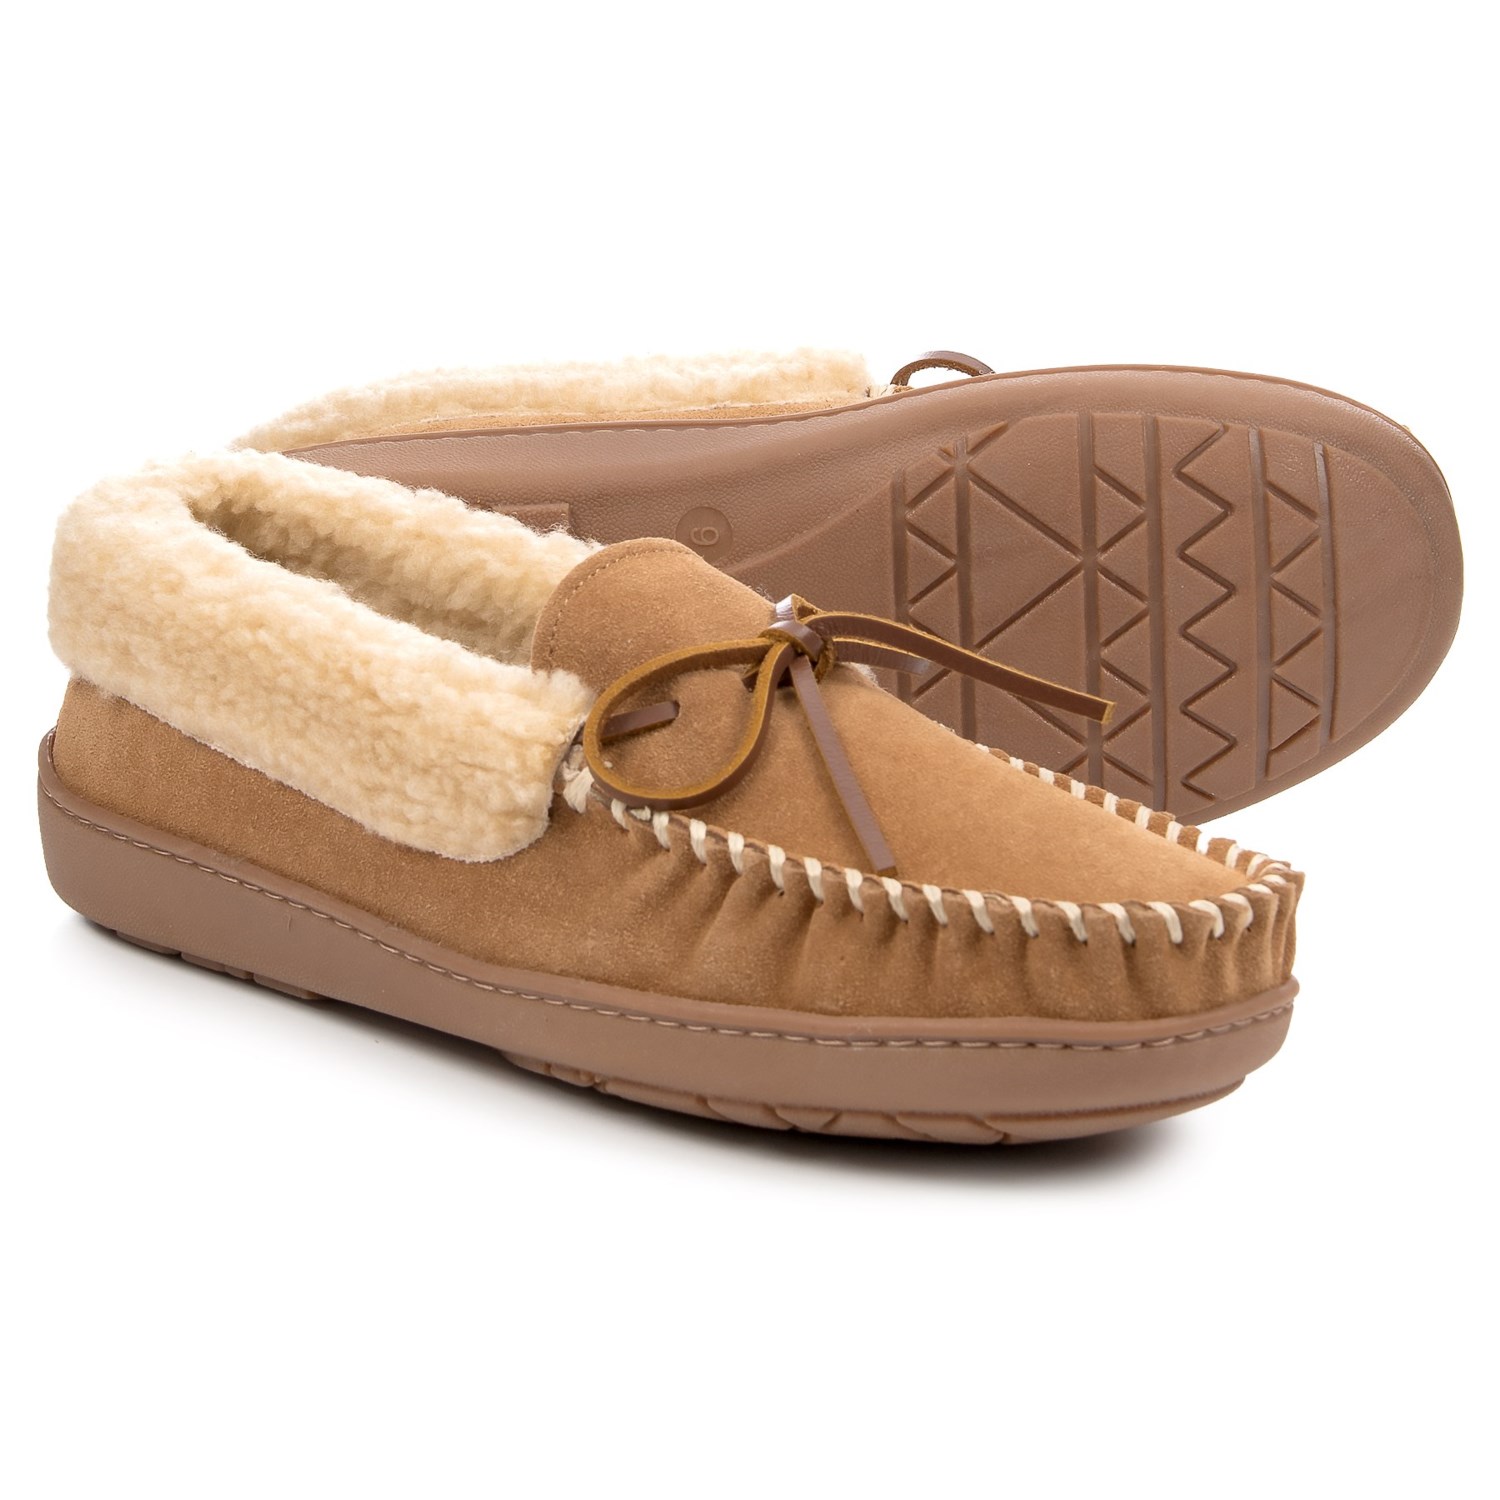 Minnetonka Moccasin Cade Trapper Slippers – Suede (For Men)